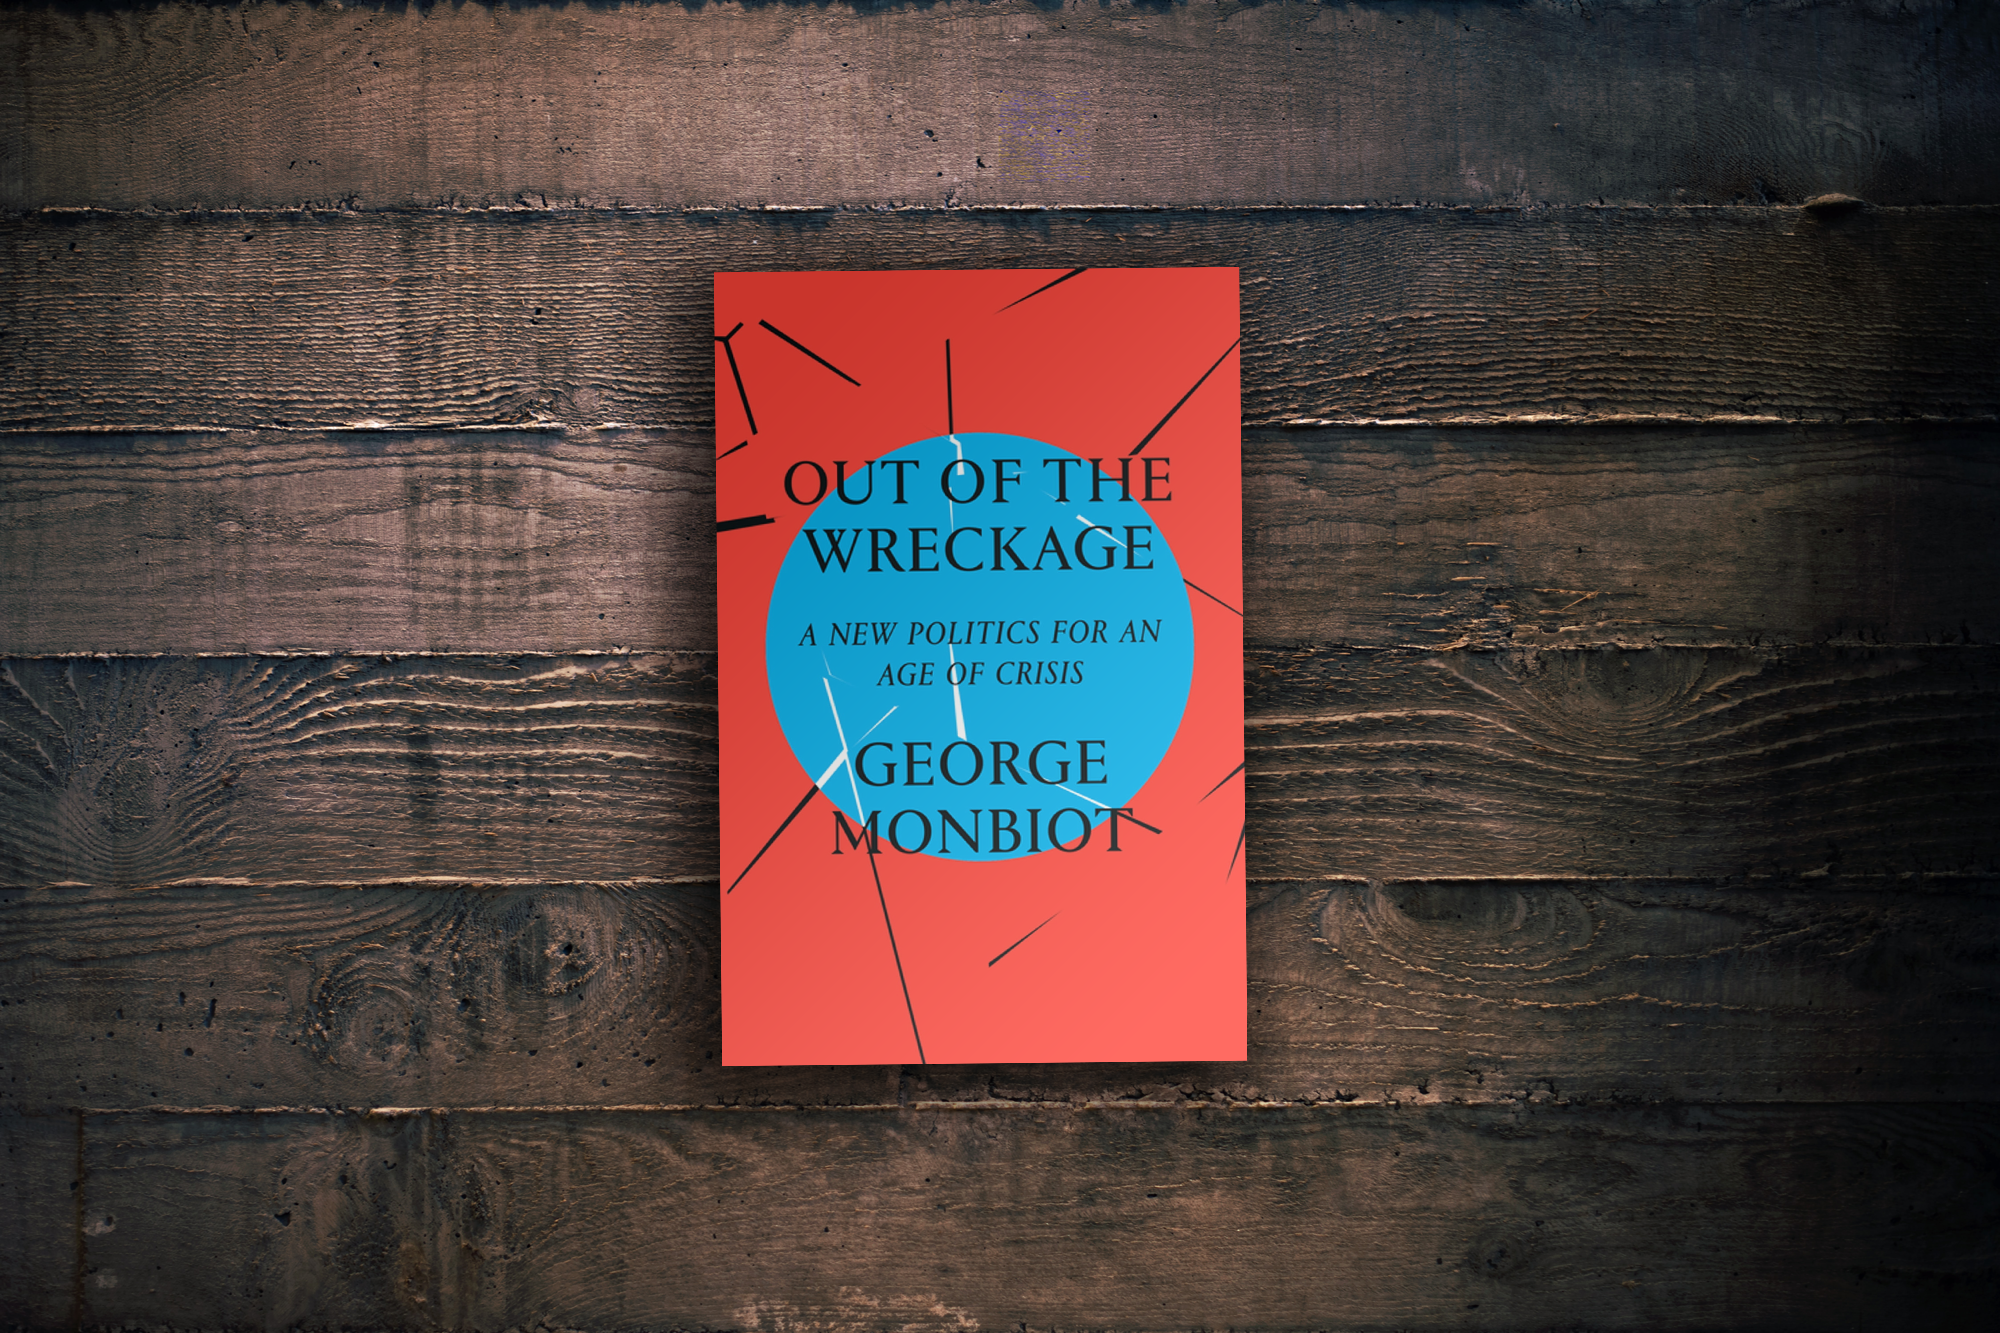 Cover of the book "Out of the Wreckage" by G. Monbiot